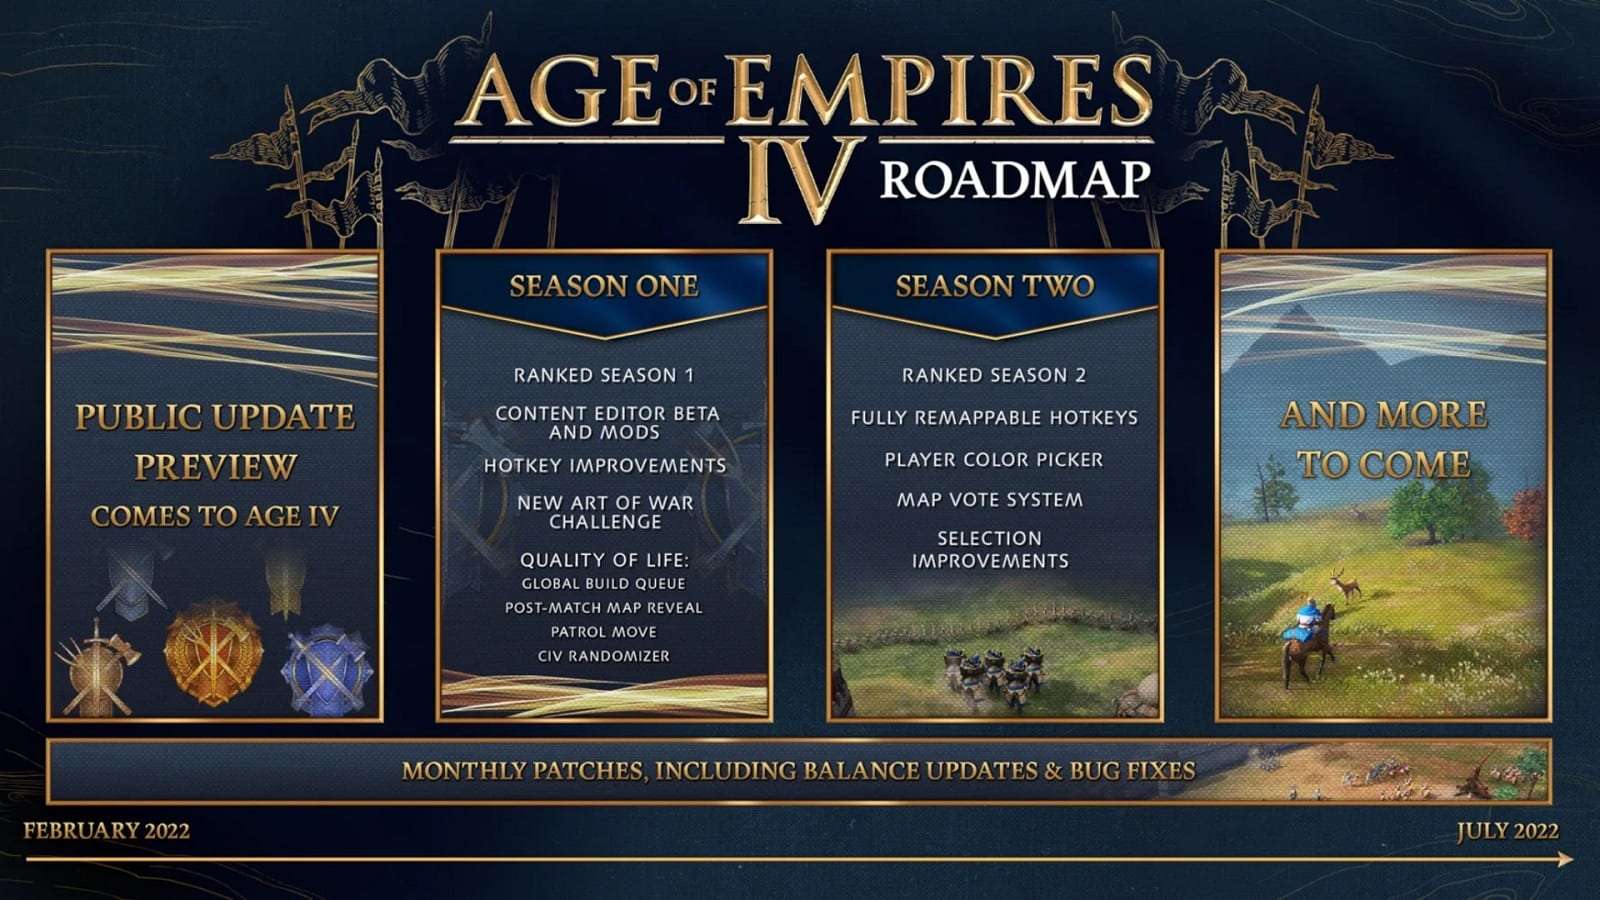 Age of empires 4 roadmap